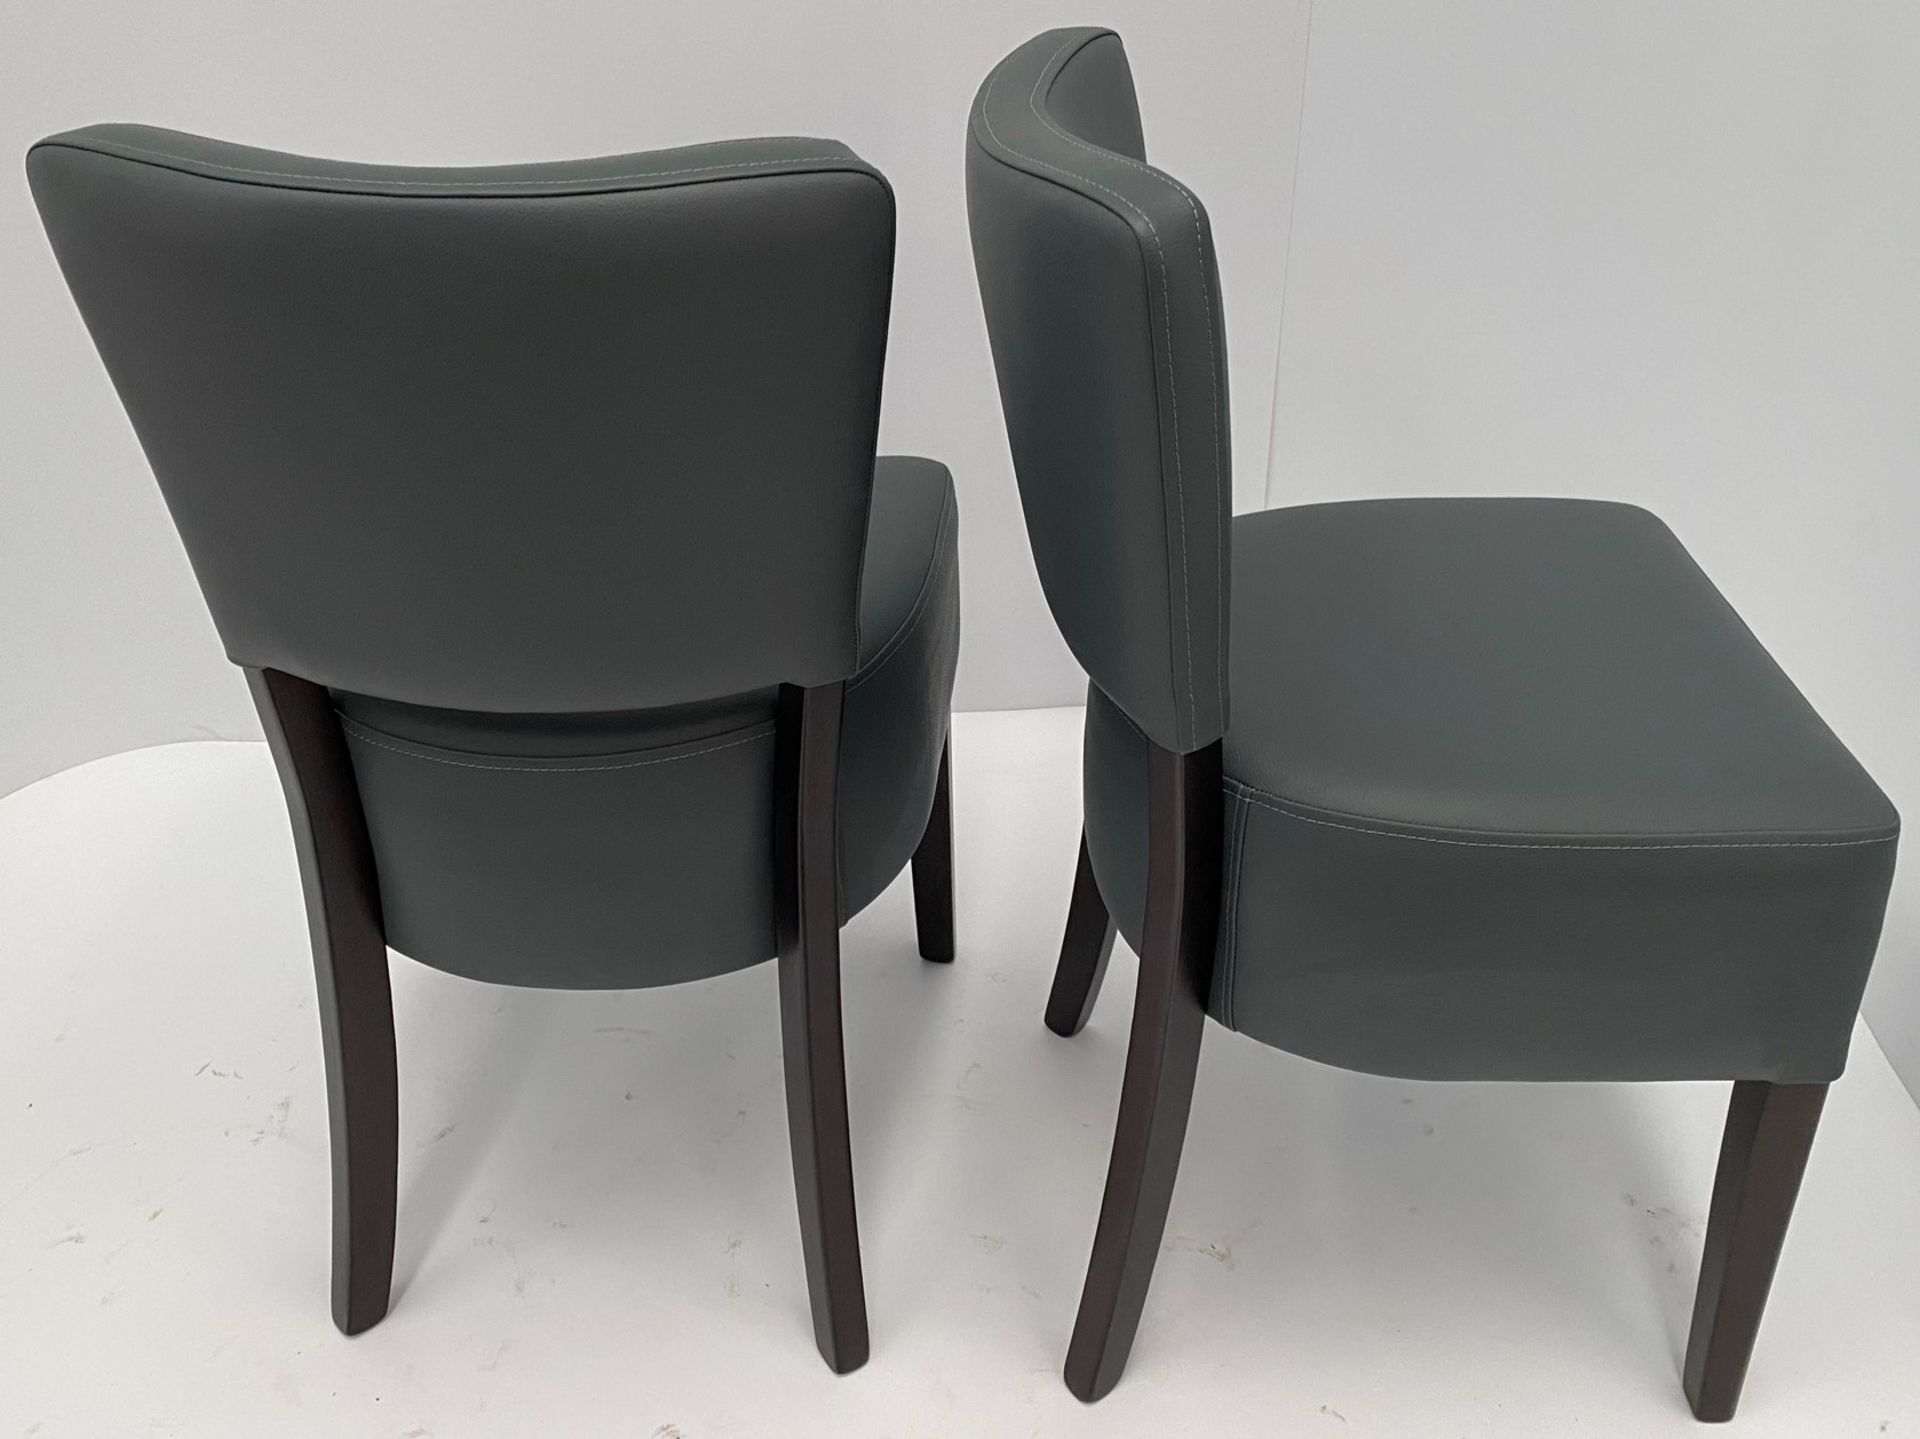 2 x Oregon Vena SA-4 Grey side/dining chairs with walnut coloured frames - Image 2 of 3